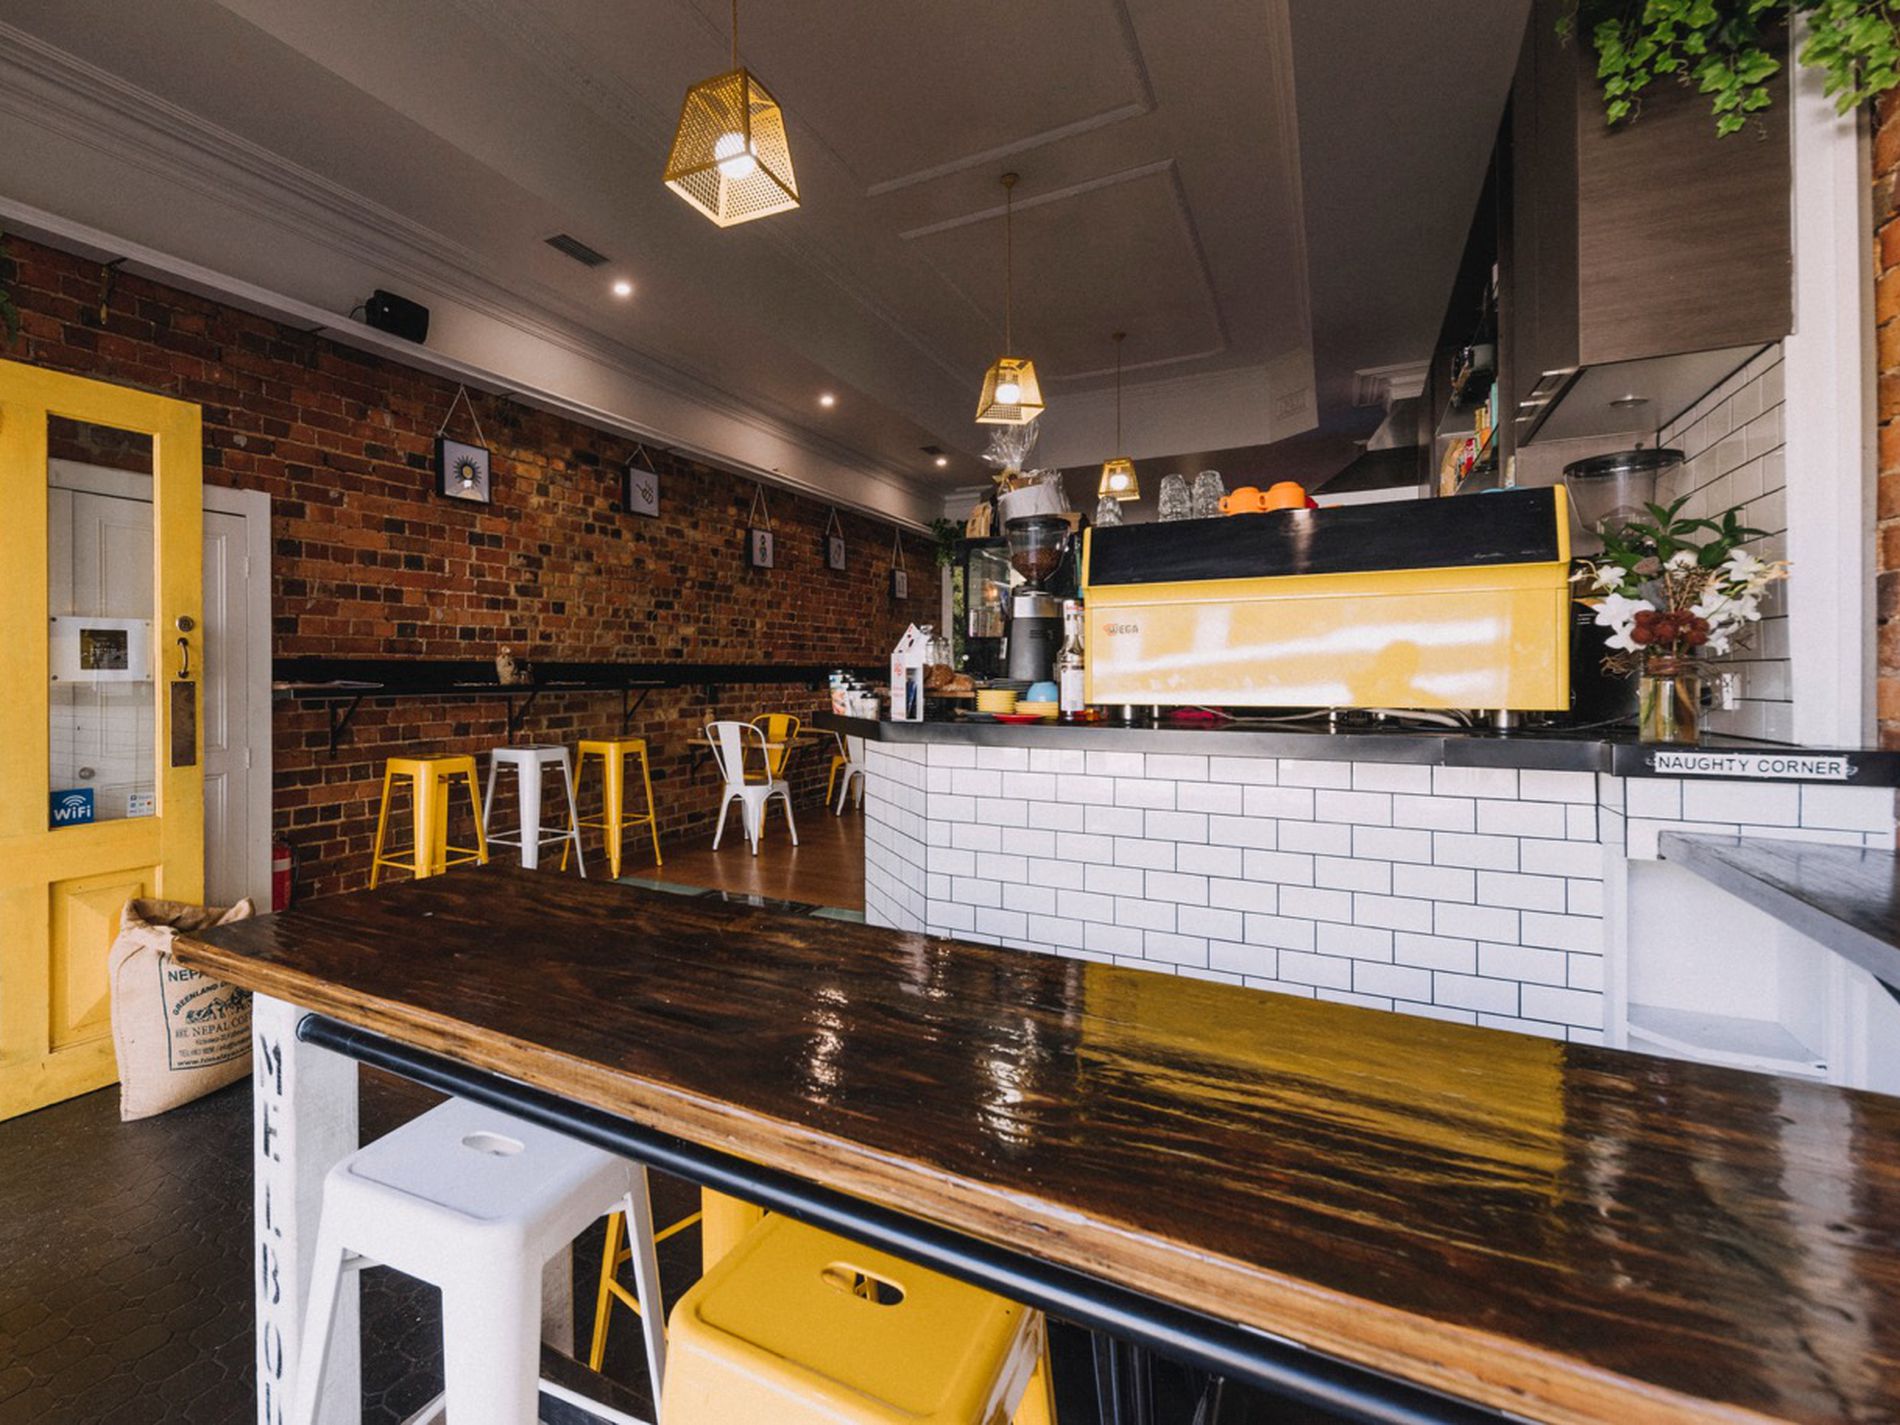 Cafe, Bar and Takeaway Business for Sale West Gippsland